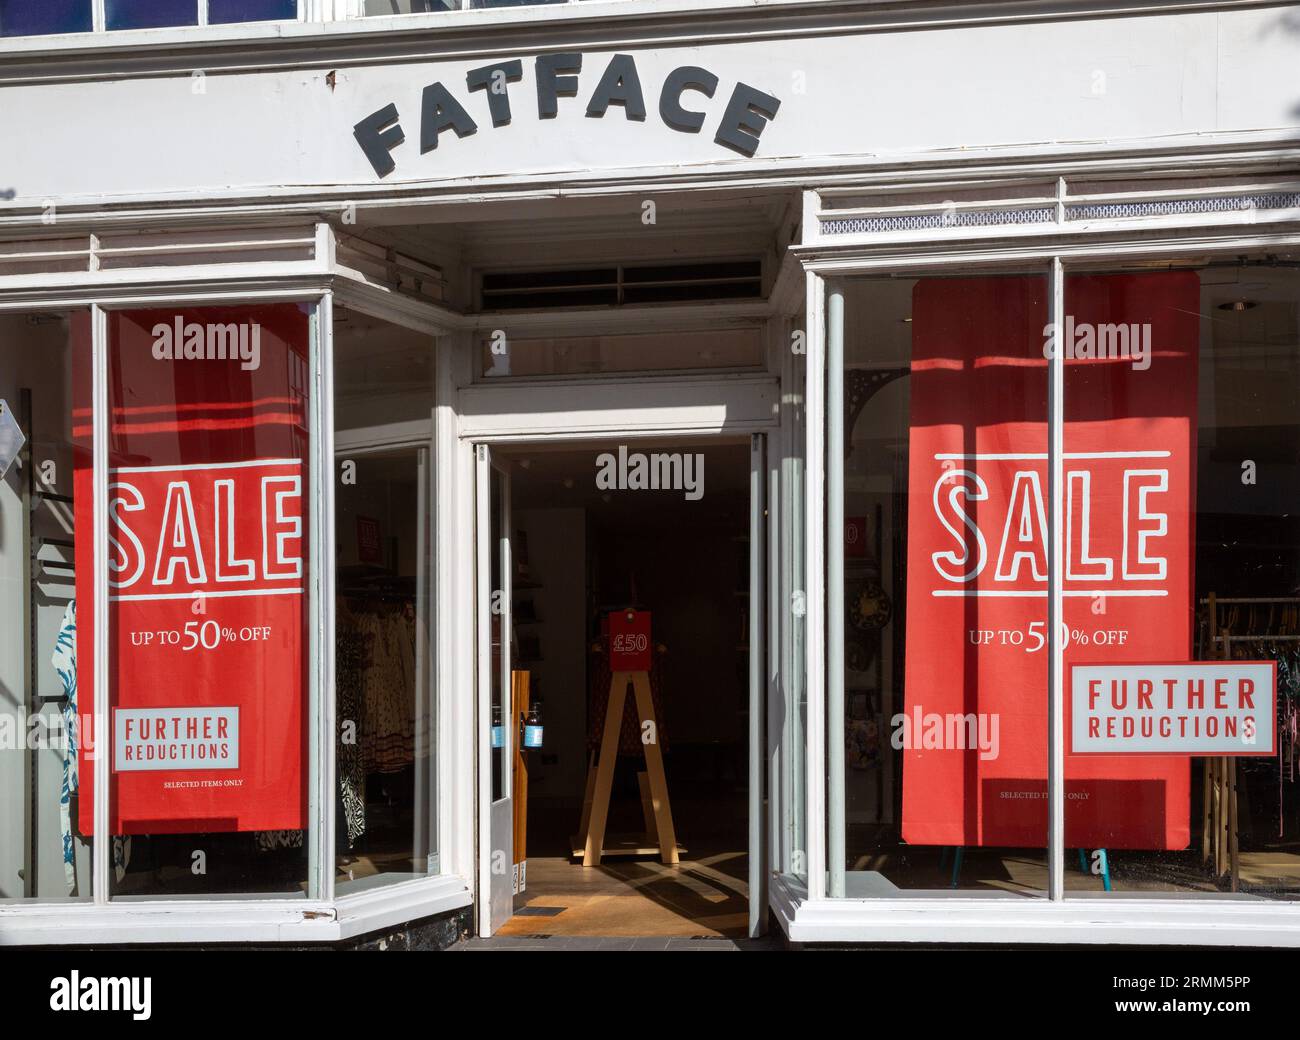 Sale posters in FatFace clothing store shop, Woodbridge, Sufffolk, England, Uk Stock Photo